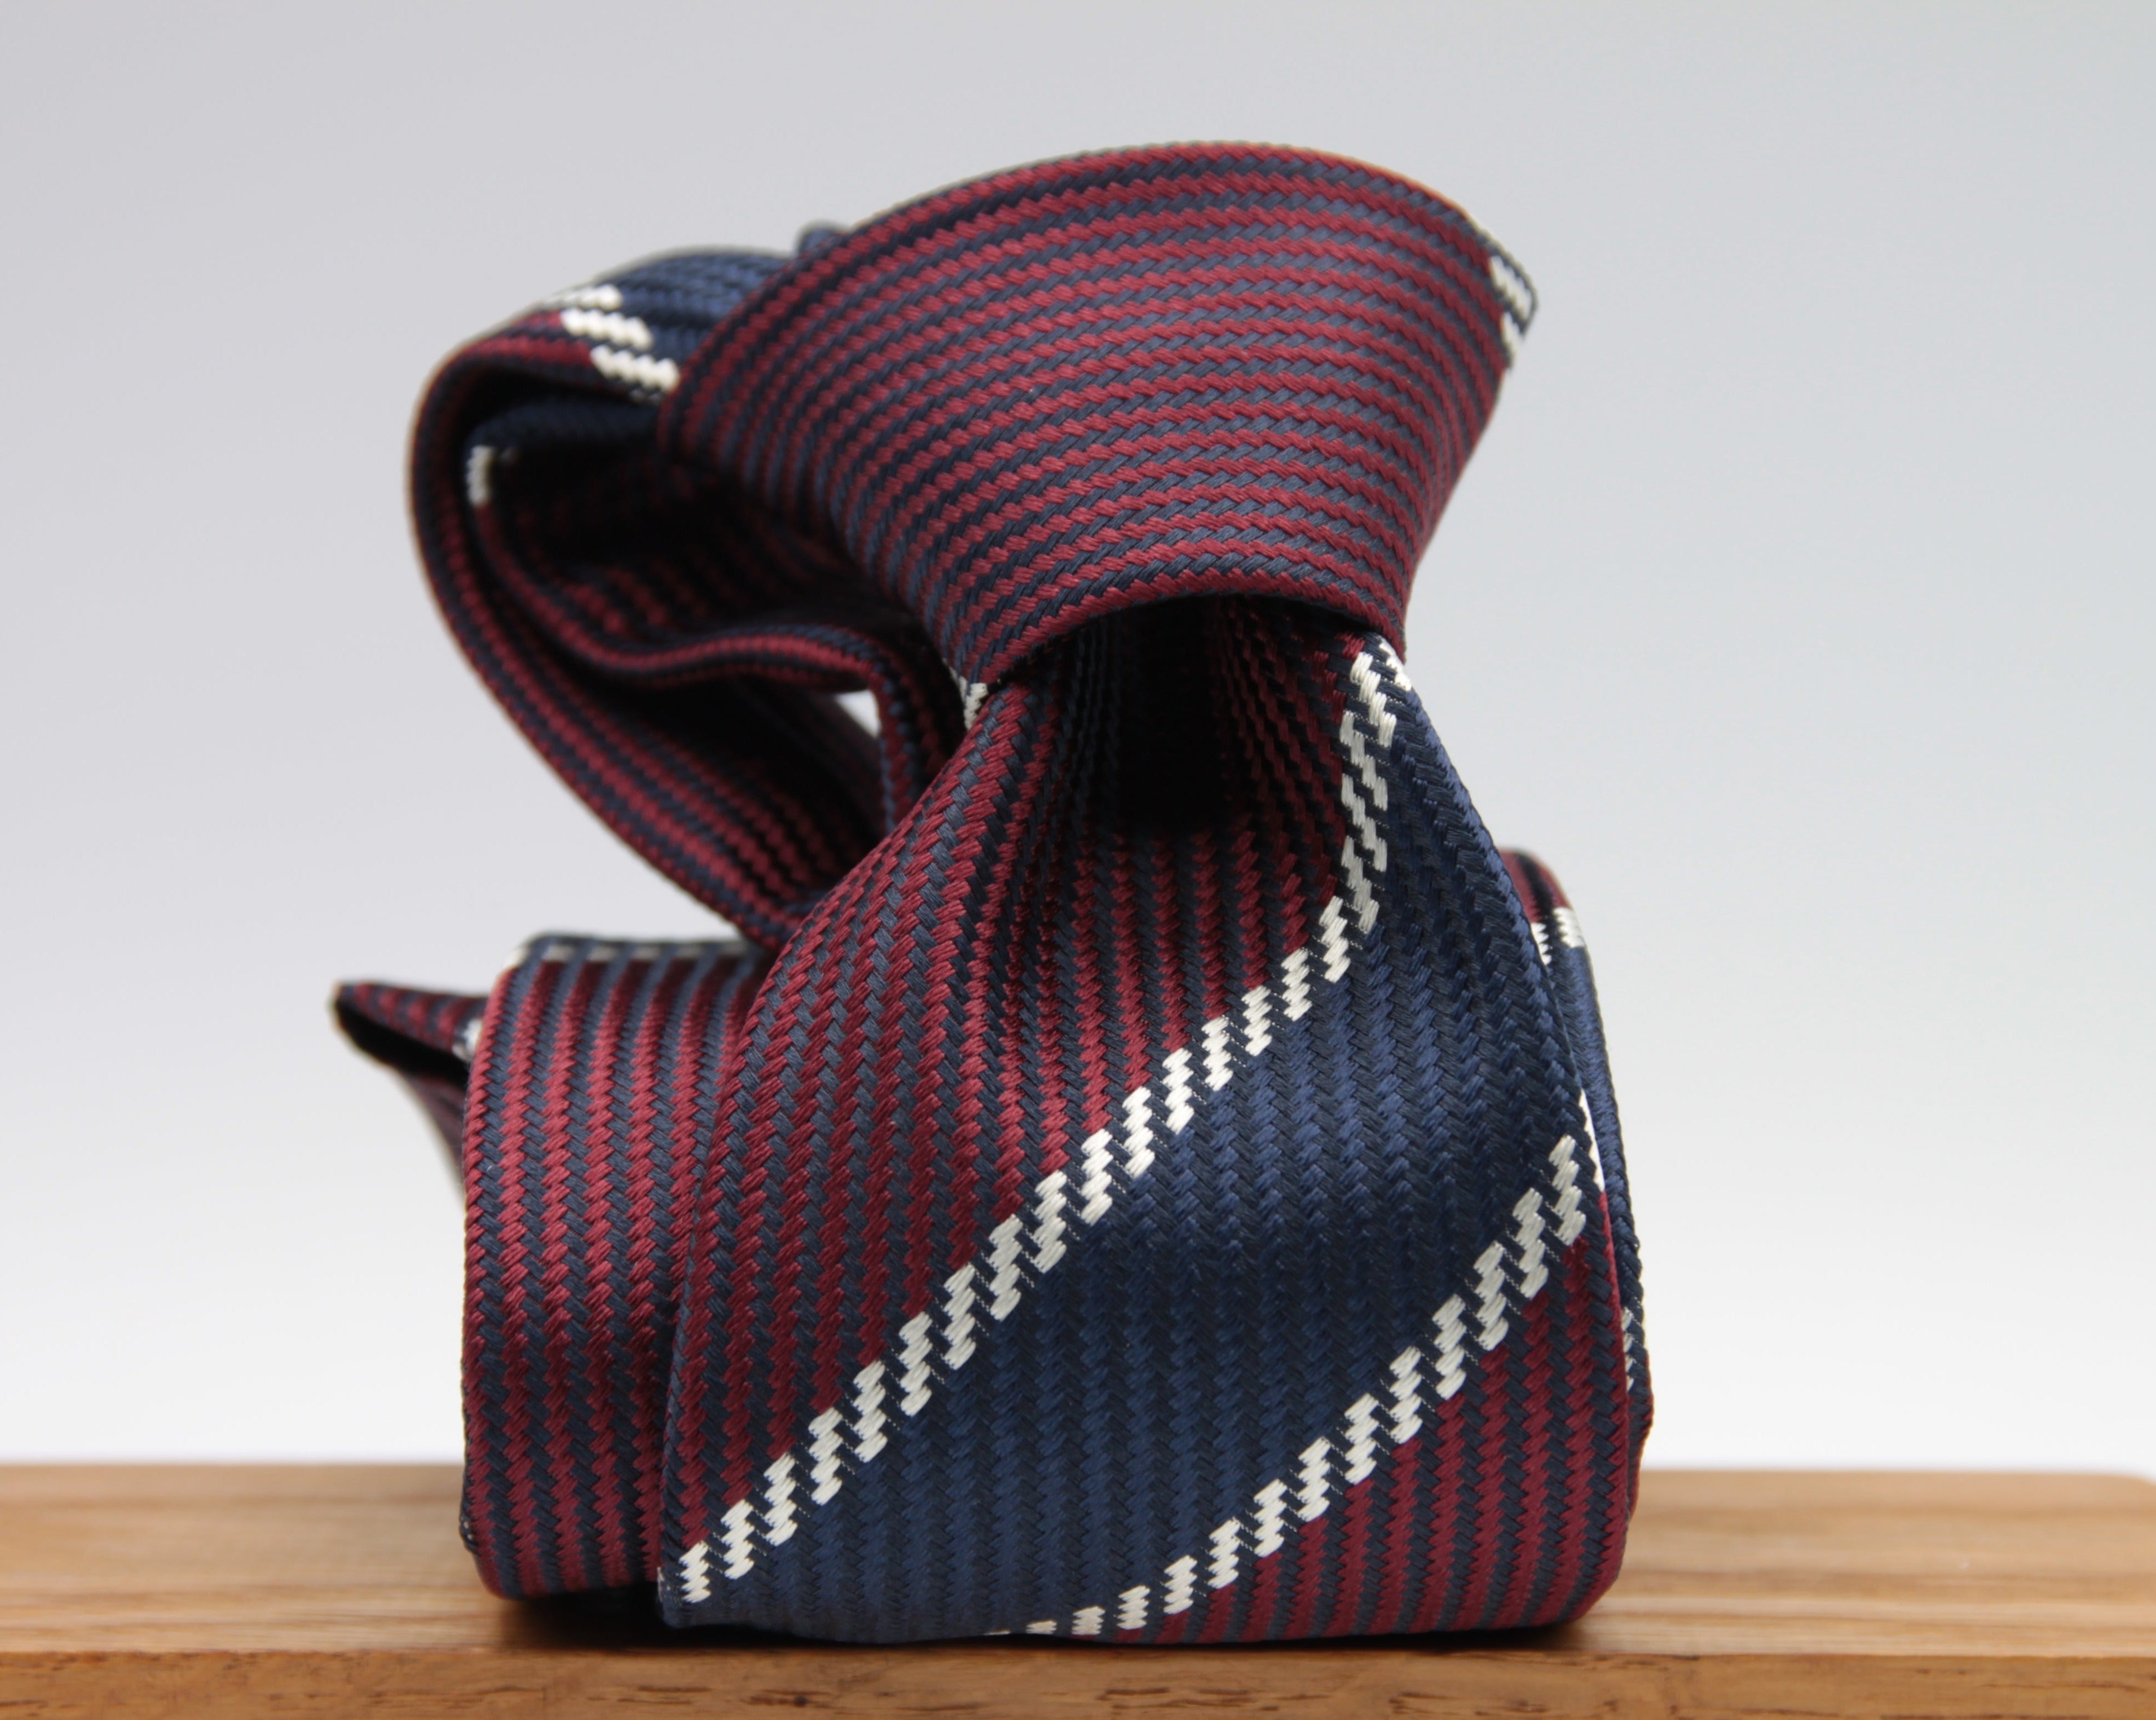 Holliday & Brown for Cruciani e Bella 100% Jacquard Silk Red, Blue and White stripe tie Handmade in Italy 8 cm x 150 cm #6425